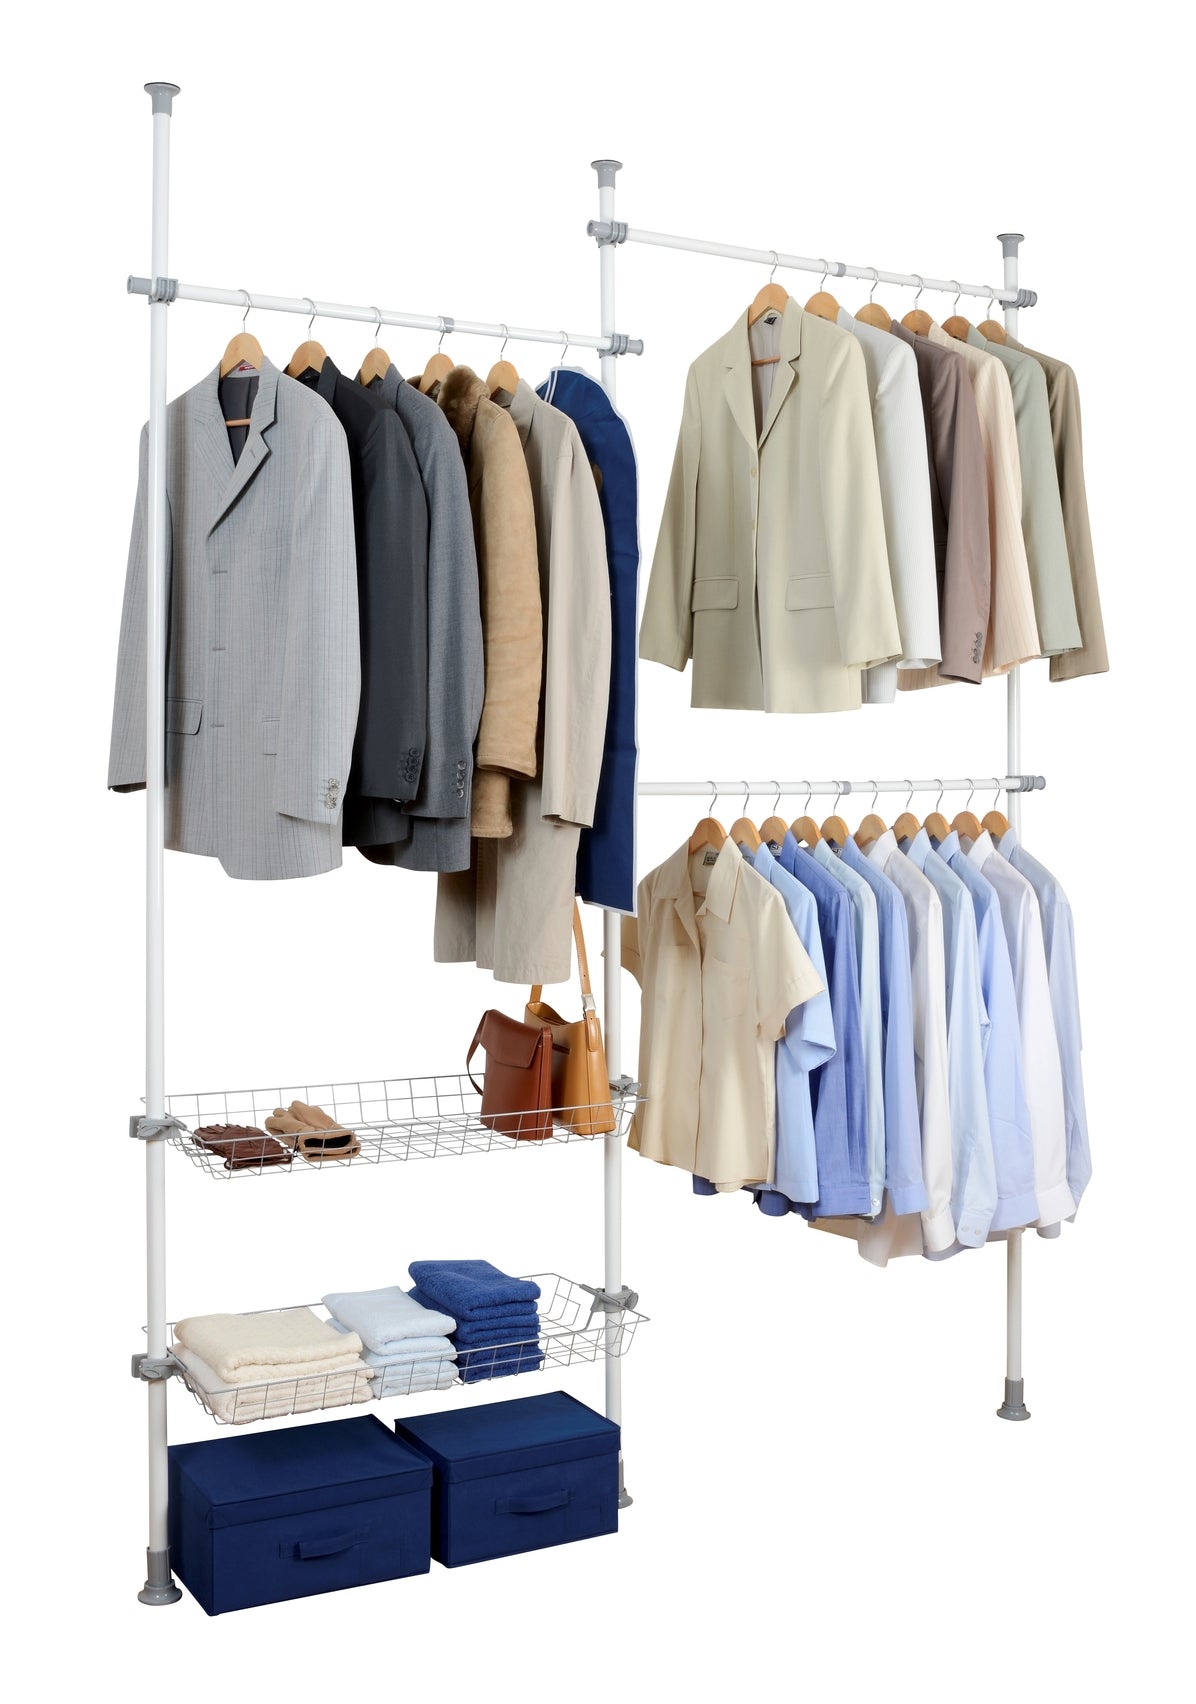 HERKULES DUO TELESCOPIC CLOTHES RACK SYSTEM